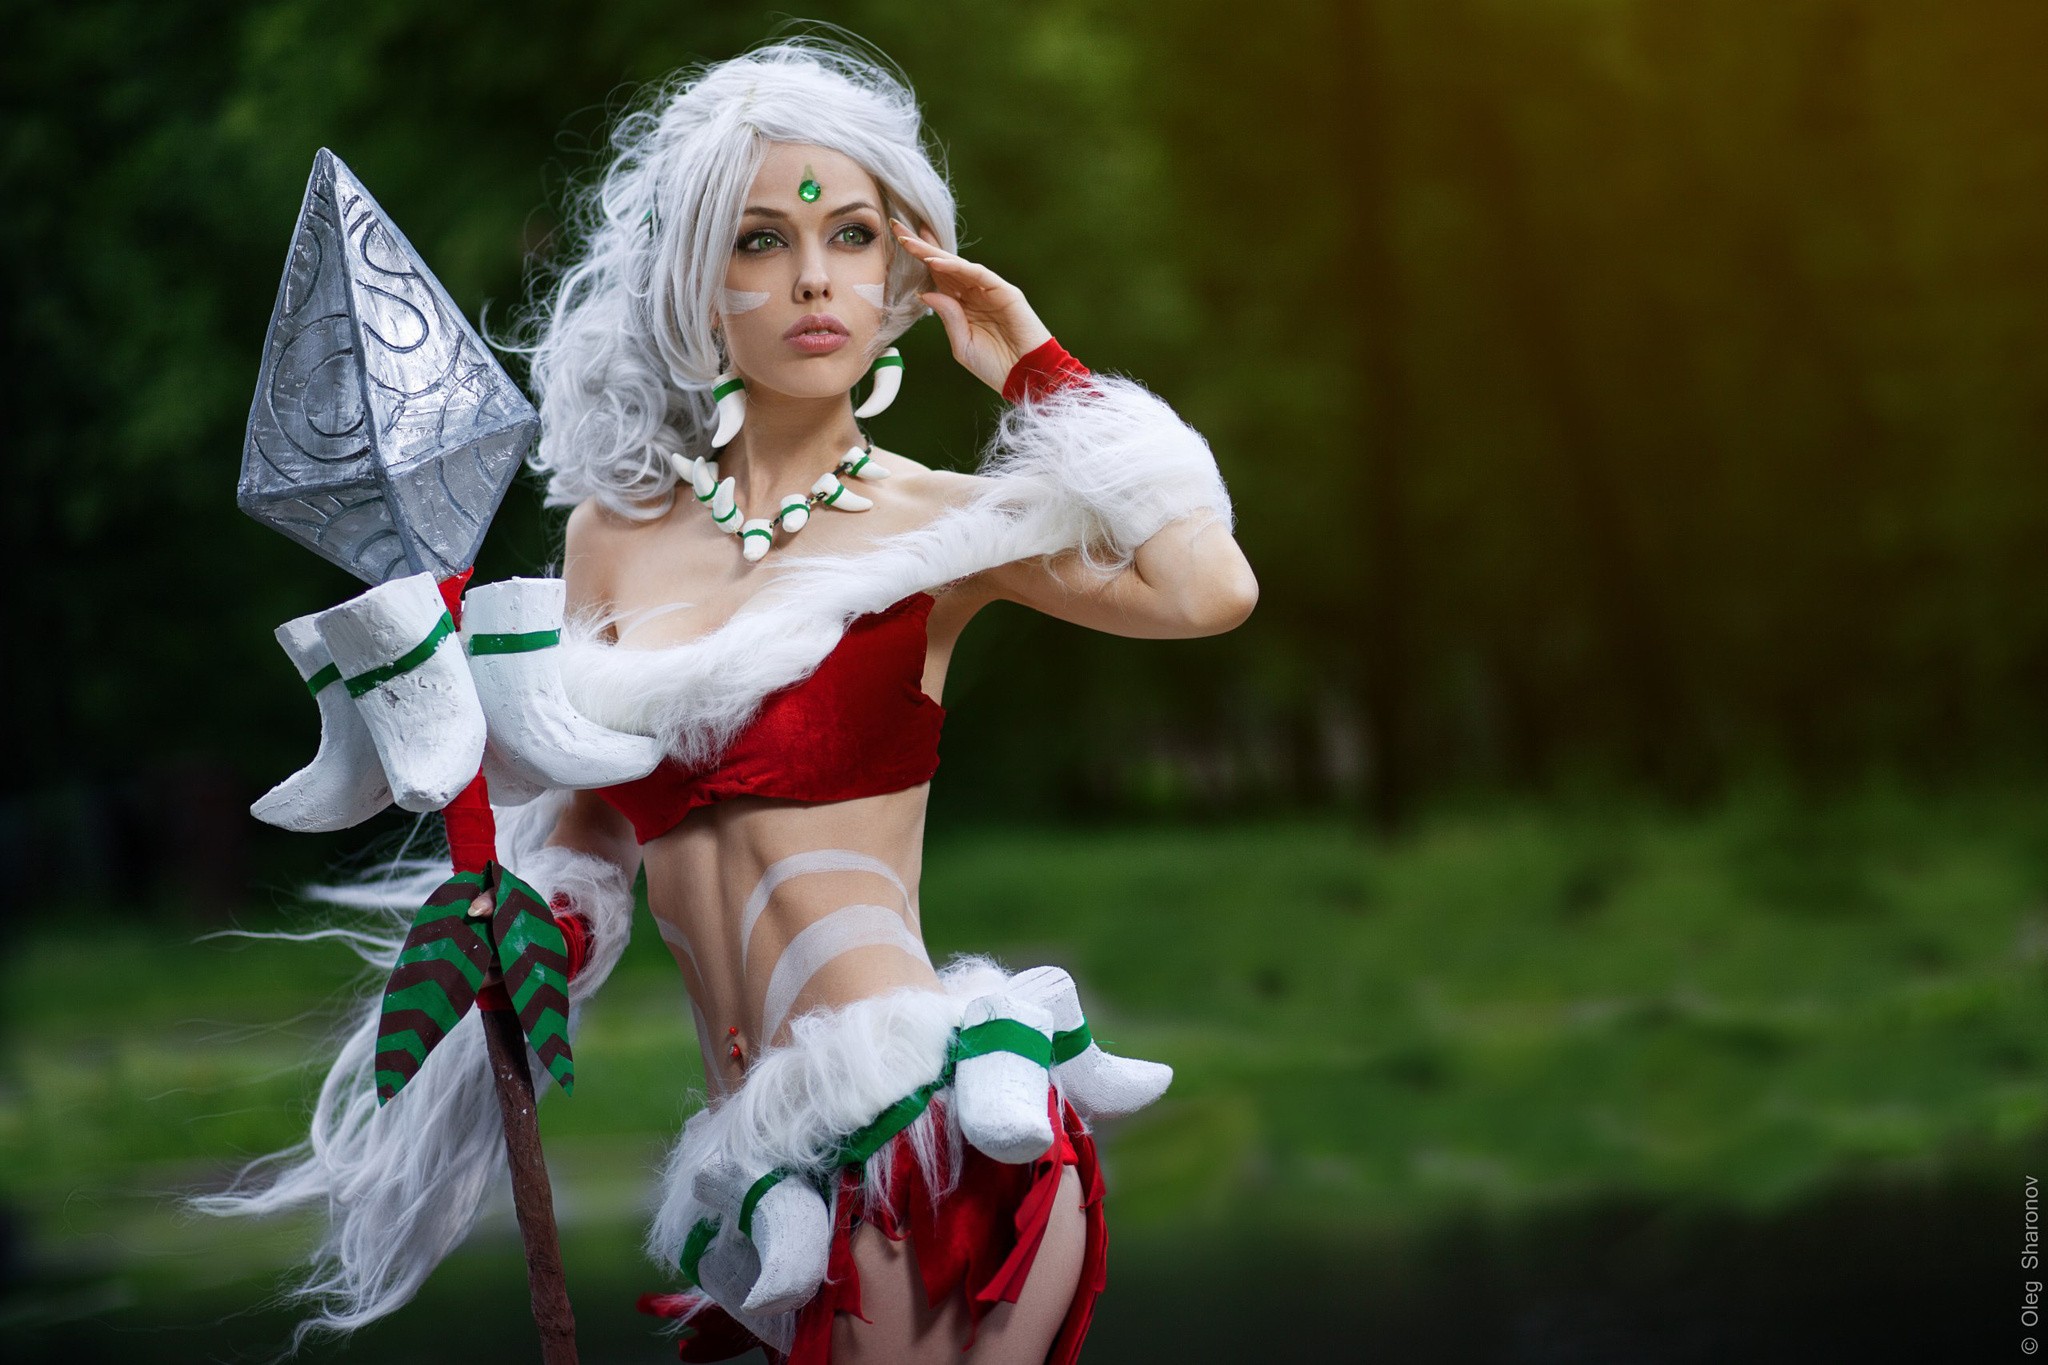 People 2048x1365 cosplay pierced navel spear Nidalee (League of Legends) League of Legends women white hair belly bare shoulders gray hair necklace costumes fantasy girl model video game girls Oleg Sharonov